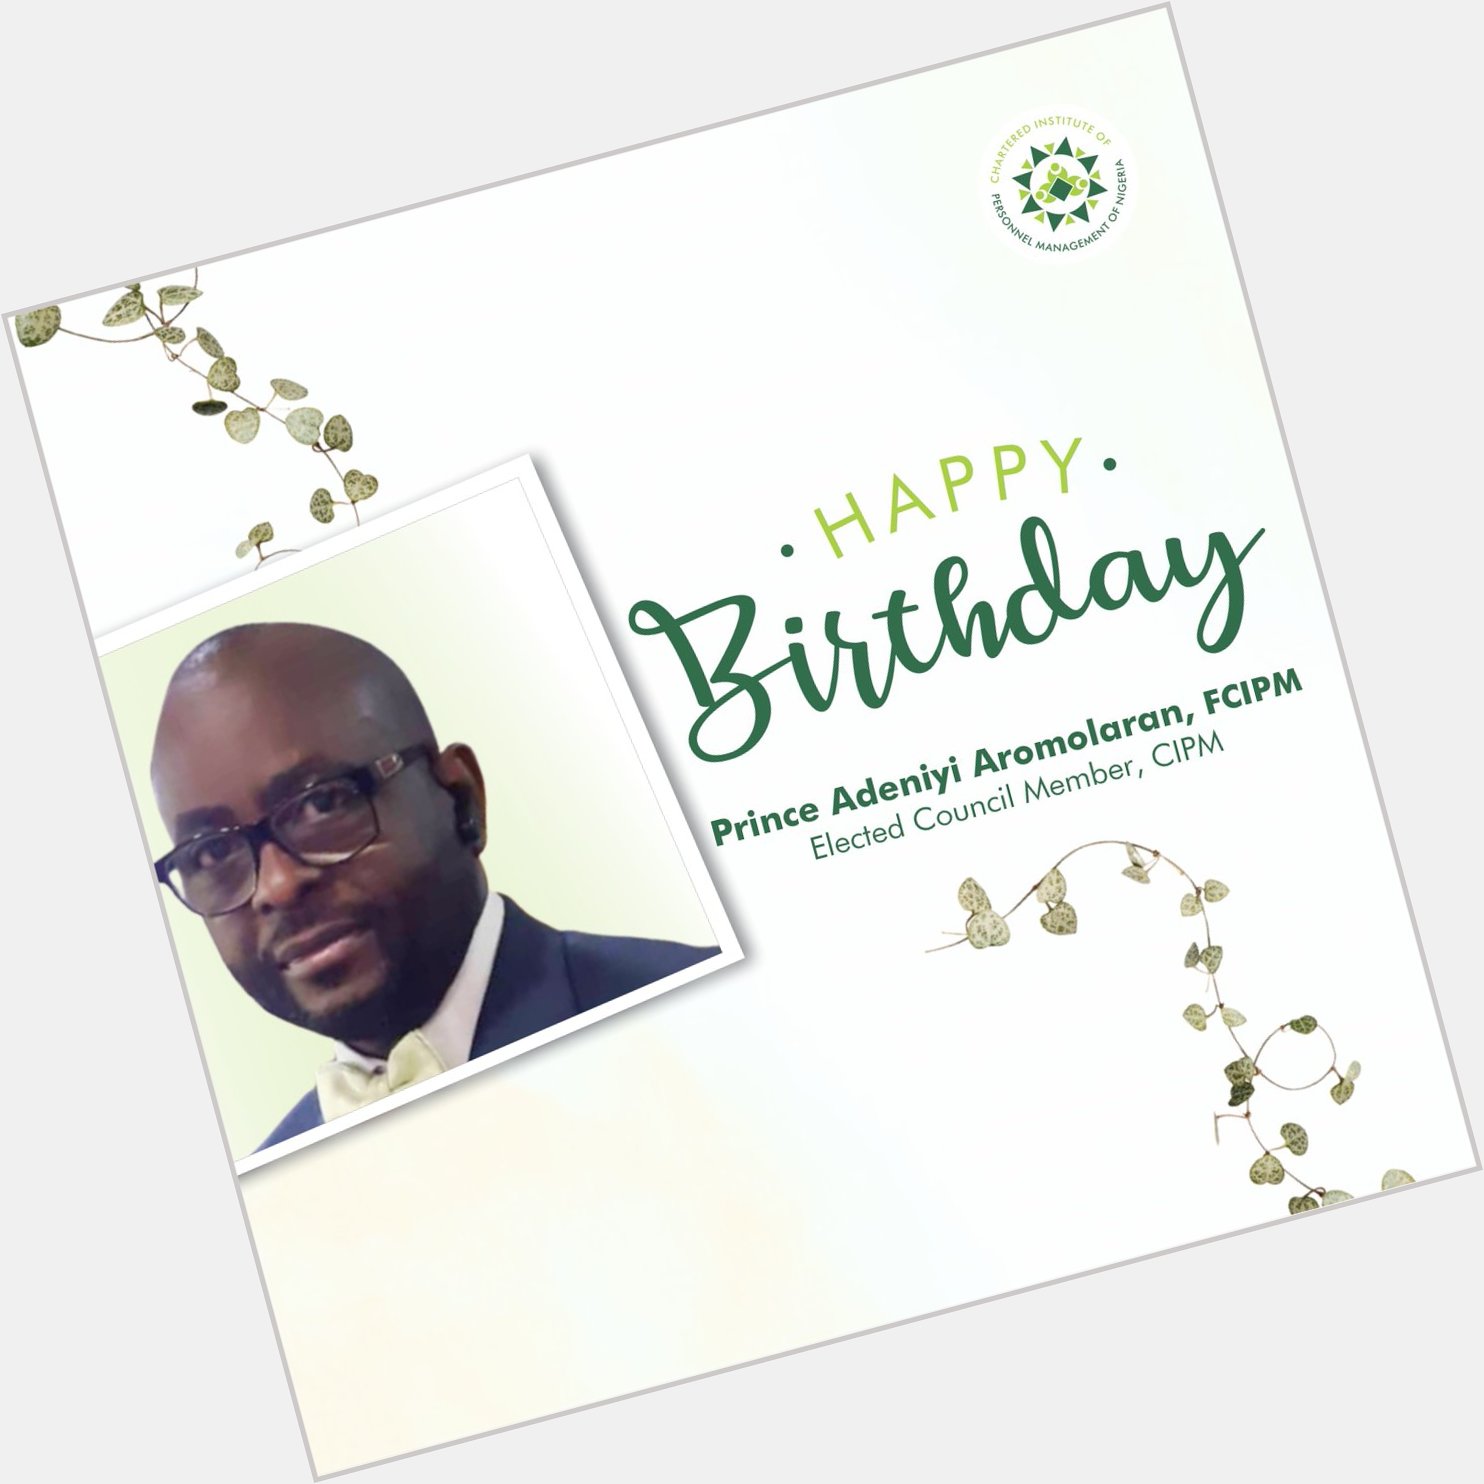 Celebrating our Elected Council Member, Prince Adeniyi Aromolaran, FCIPM on this special day.

Happy Birthday Sir! 